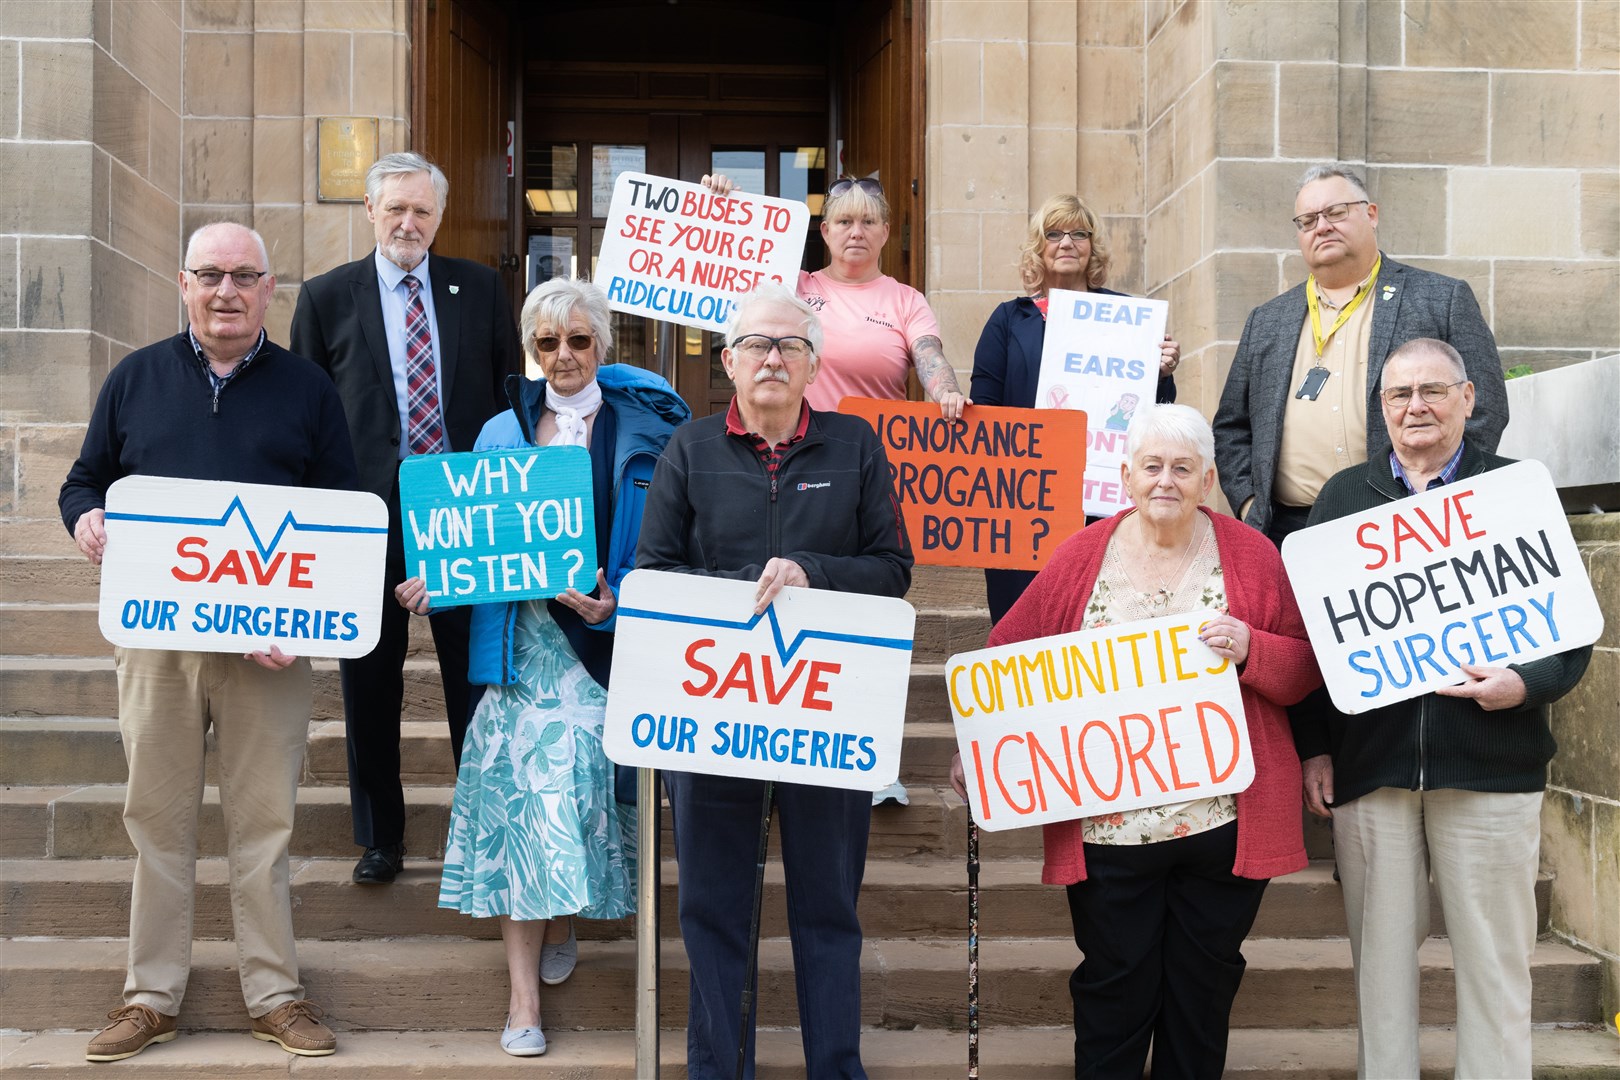 Save Our Surgeries campaign group protesting outside the Moray Council ahead of the Moray IJB meeting. Picture: Beth Taylor